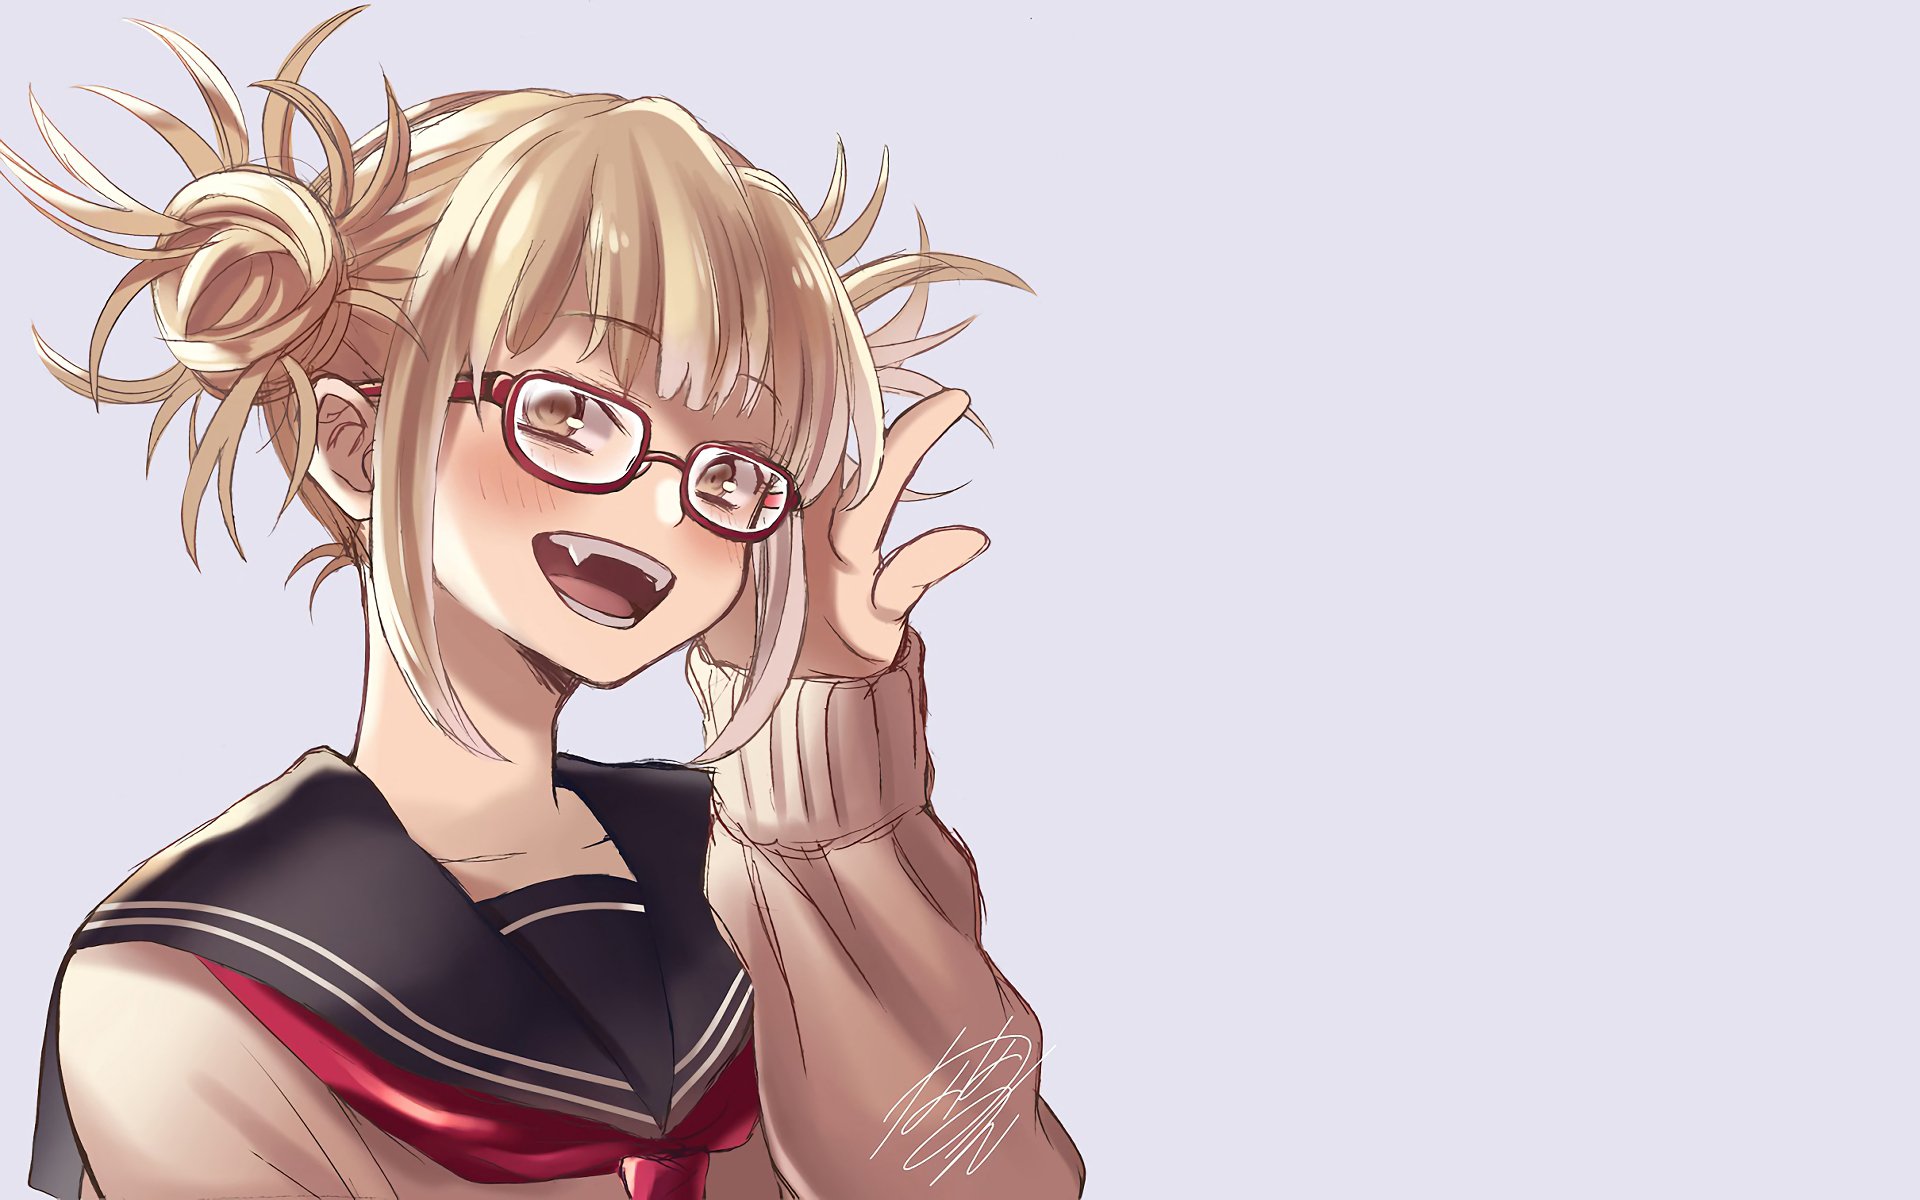 Himiko Toga Background HD Wallpapers.